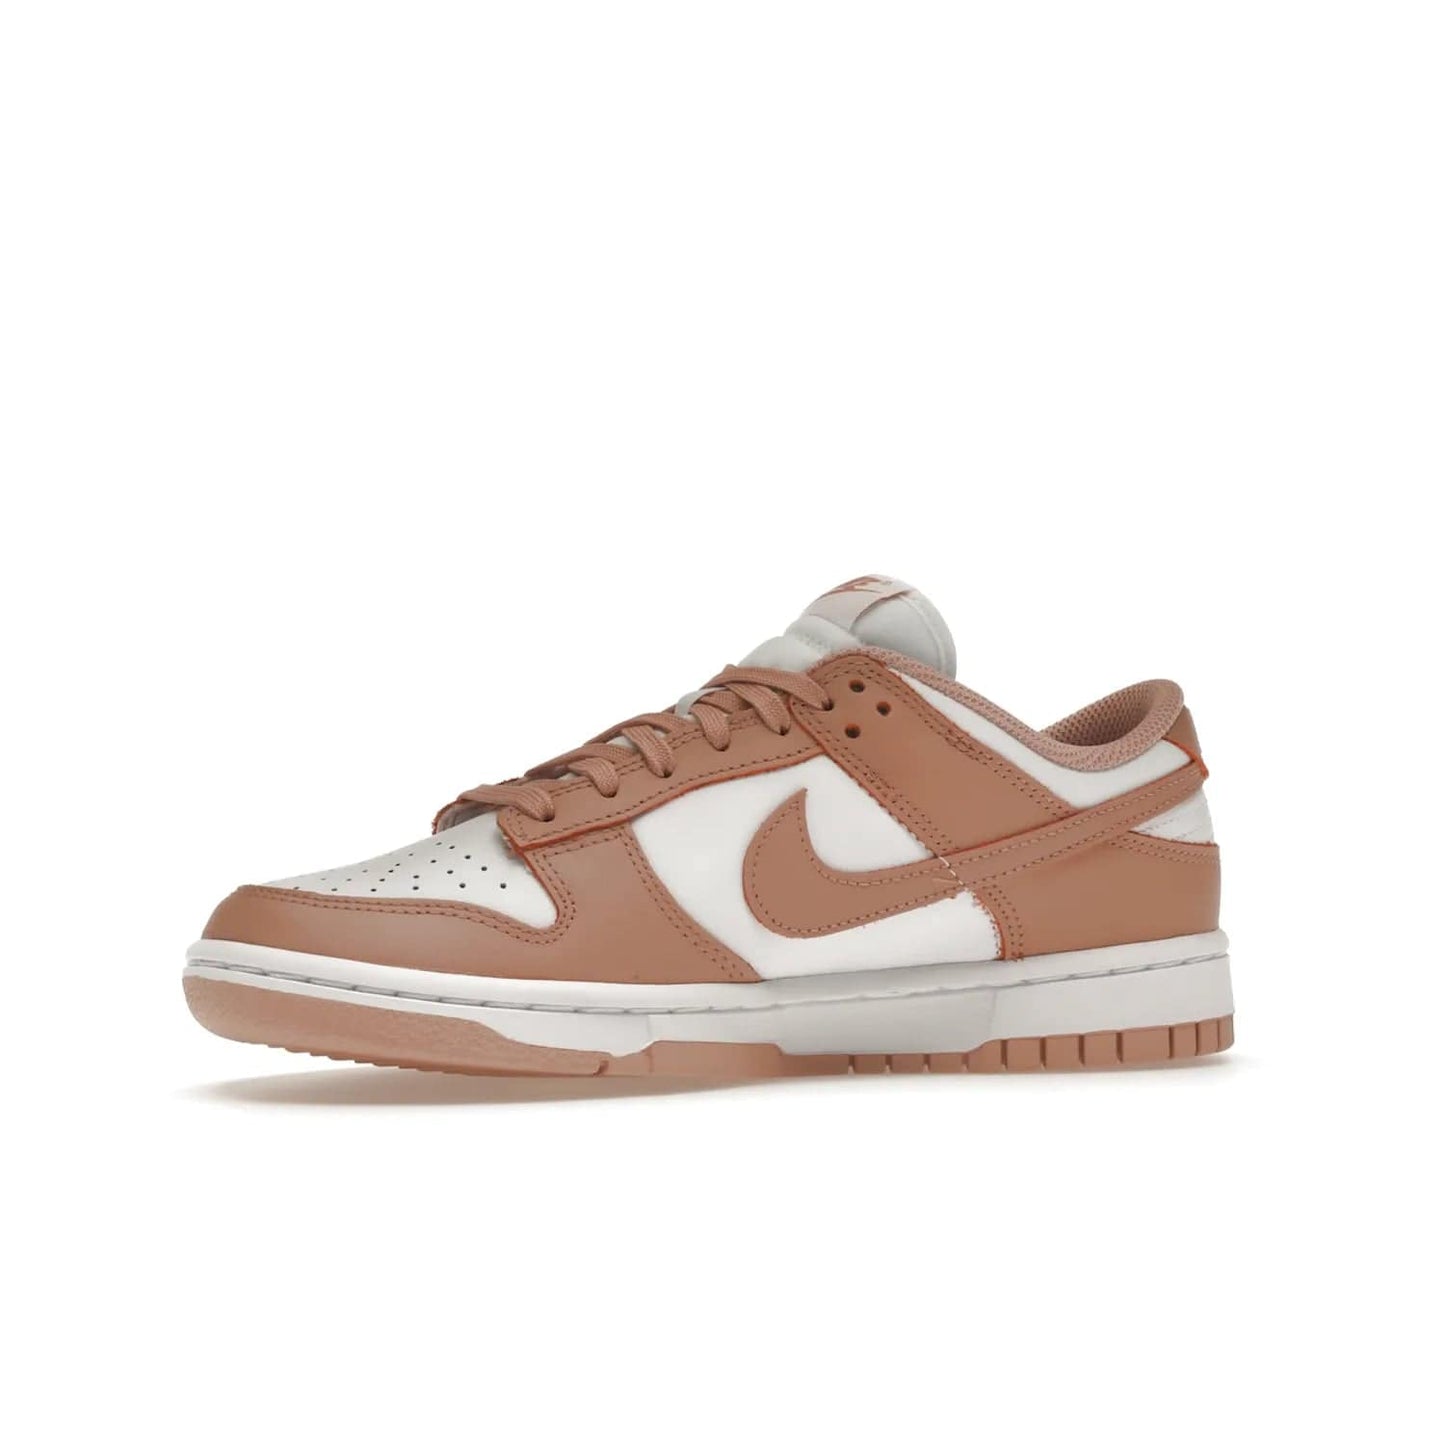 Nike Dunk Low Rose Whisper (Women's) - Image 17 - Only at www.BallersClubKickz.com - The Nike Dunk Low Rose Whisper is the perfect summer shoe with classic two-tone look and vintage-inspired design. Features white and Rose Whisper leather upper, woven tongue labels and EVA foam sole for plush cushioning. Available June 2022 at $100.